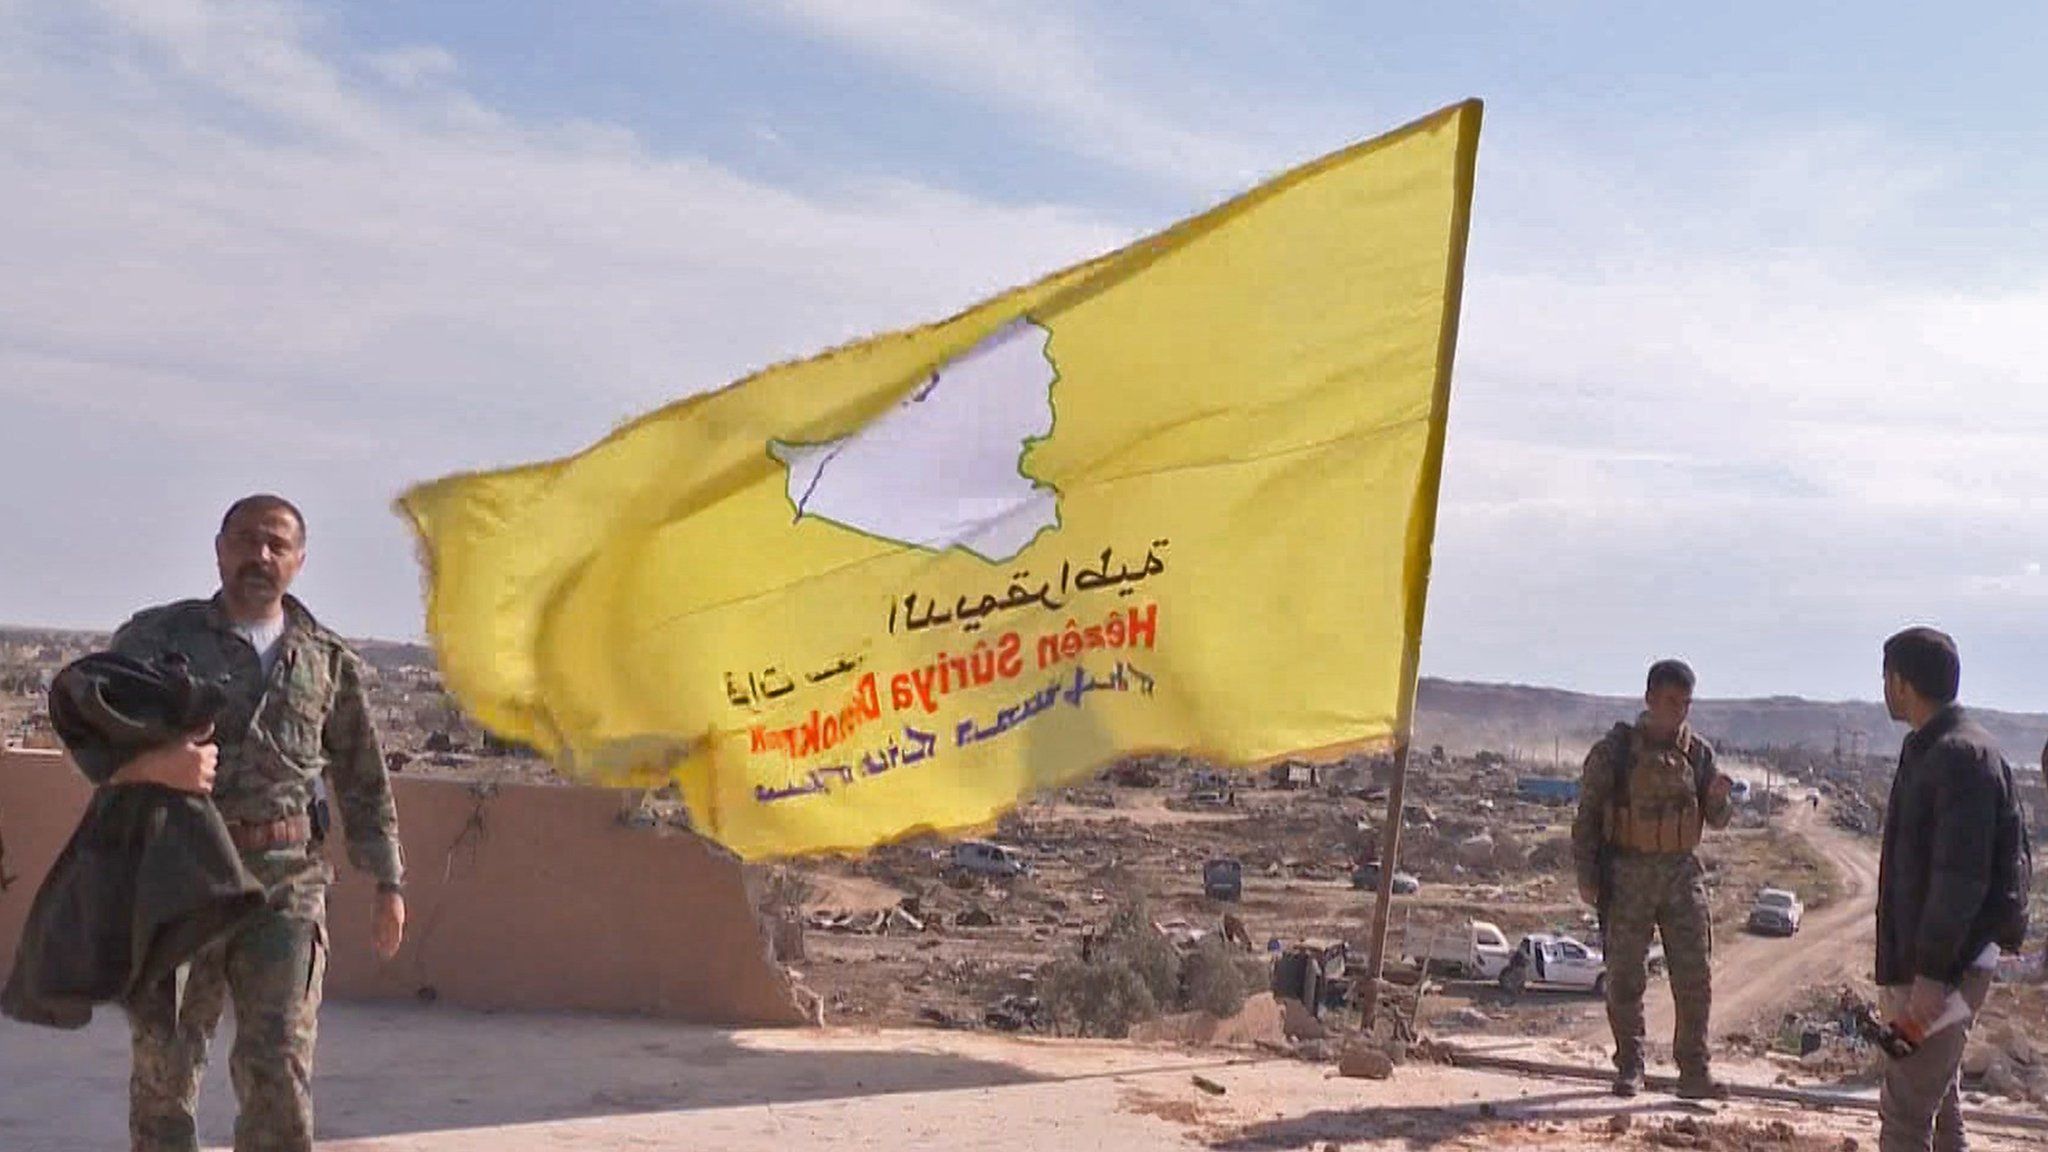 Syrian fighters raise a yellow flag as they celebrate the defeat of IS